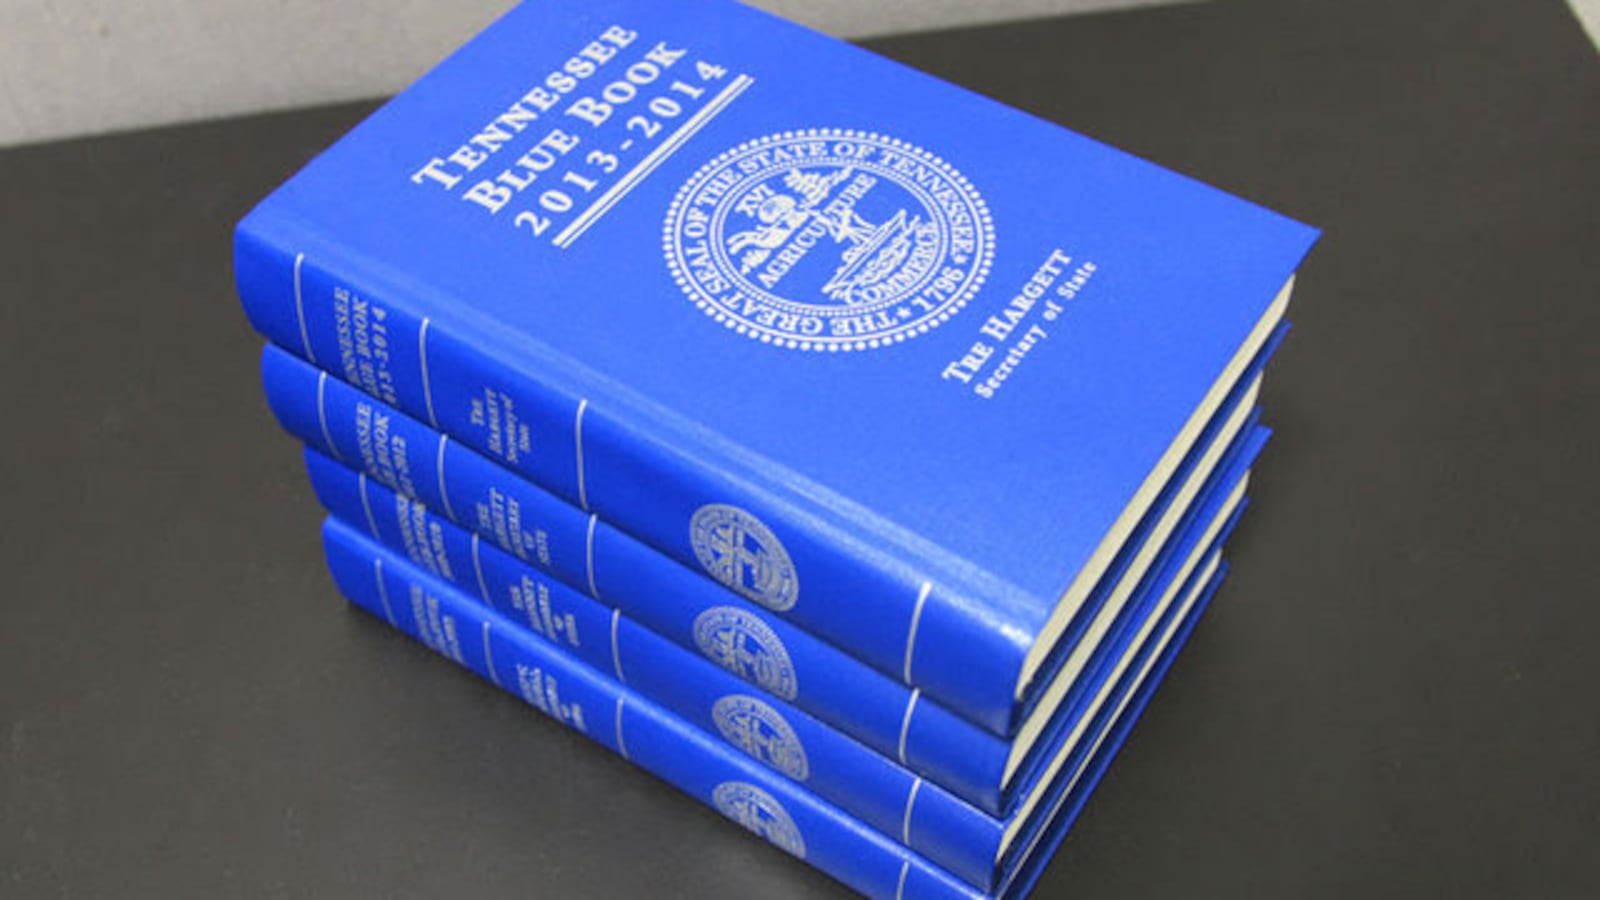 The Tennessee Blue Book, a manual of useful information about the state and its government, is now a resource for K-12 educators and students via online curriculum based on the biennial tome.